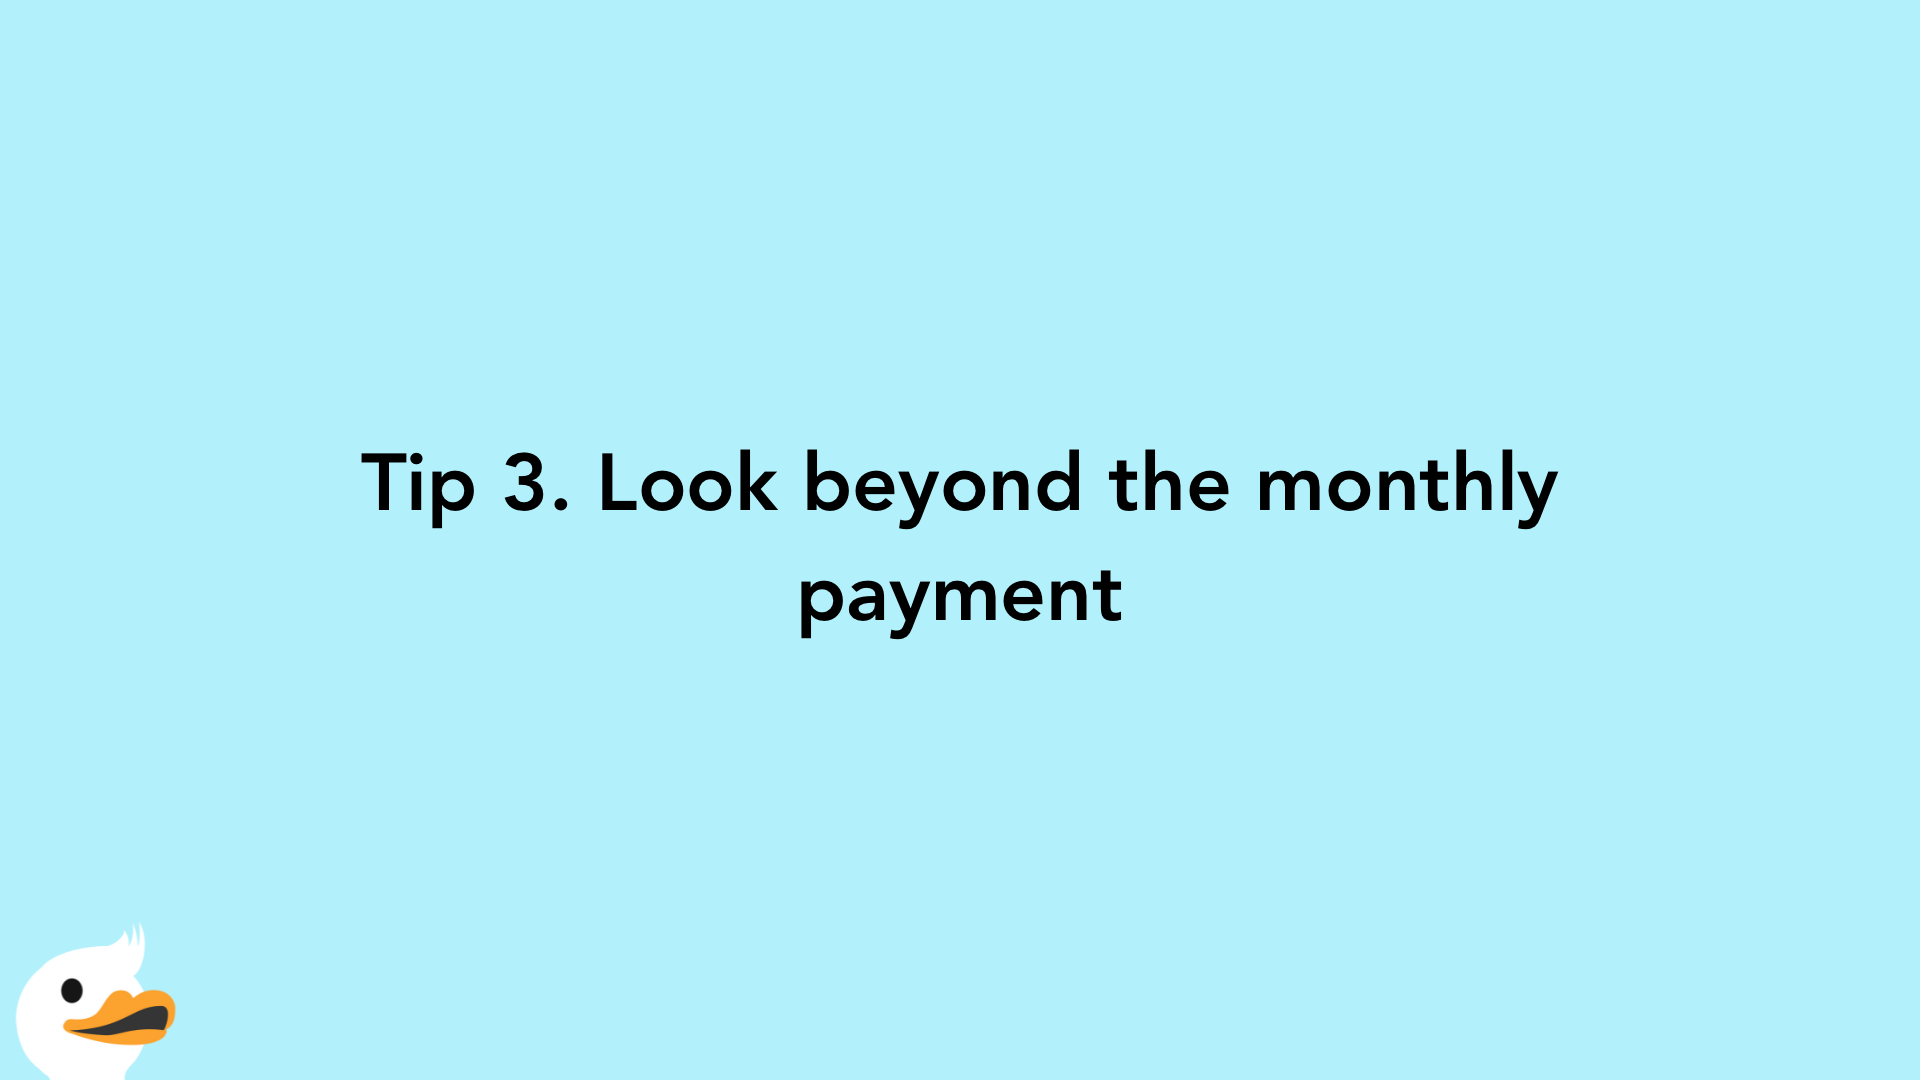 Tip 3. Look beyond the monthly payment